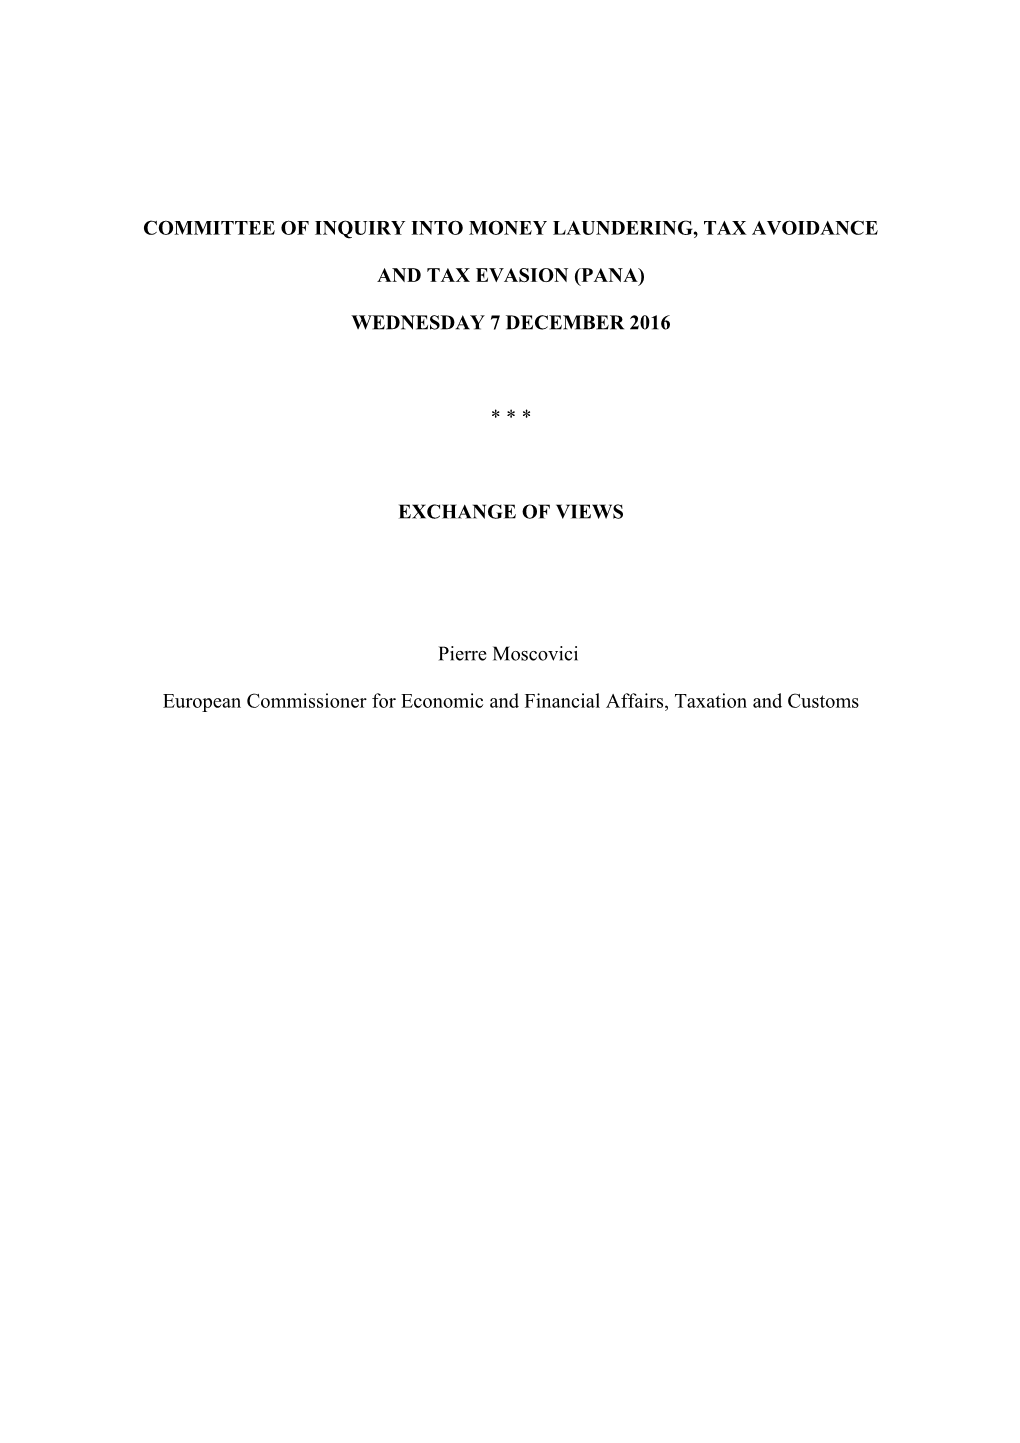 Committee of Inquiry Into Money Laundering, Tax Avoidance and Tax Evasion (Pana)